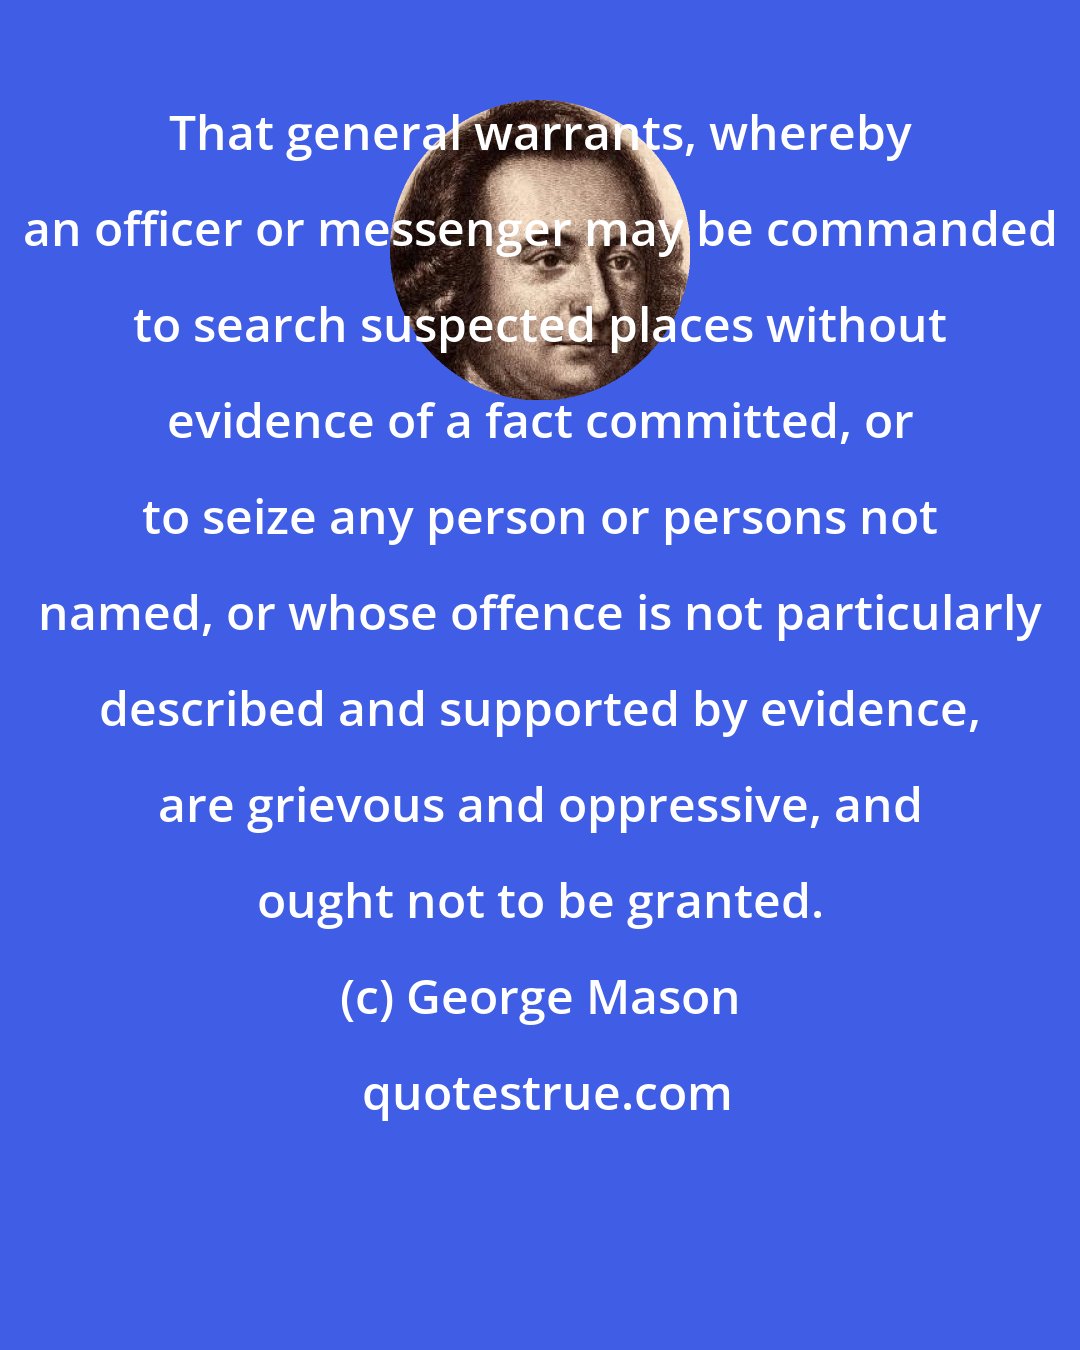 George Mason: That general warrants, whereby an officer or messenger may be commanded to search suspected places without evidence of a fact committed, or to seize any person or persons not named, or whose offence is not particularly described and supported by evidence, are grievous and oppressive, and ought not to be granted.